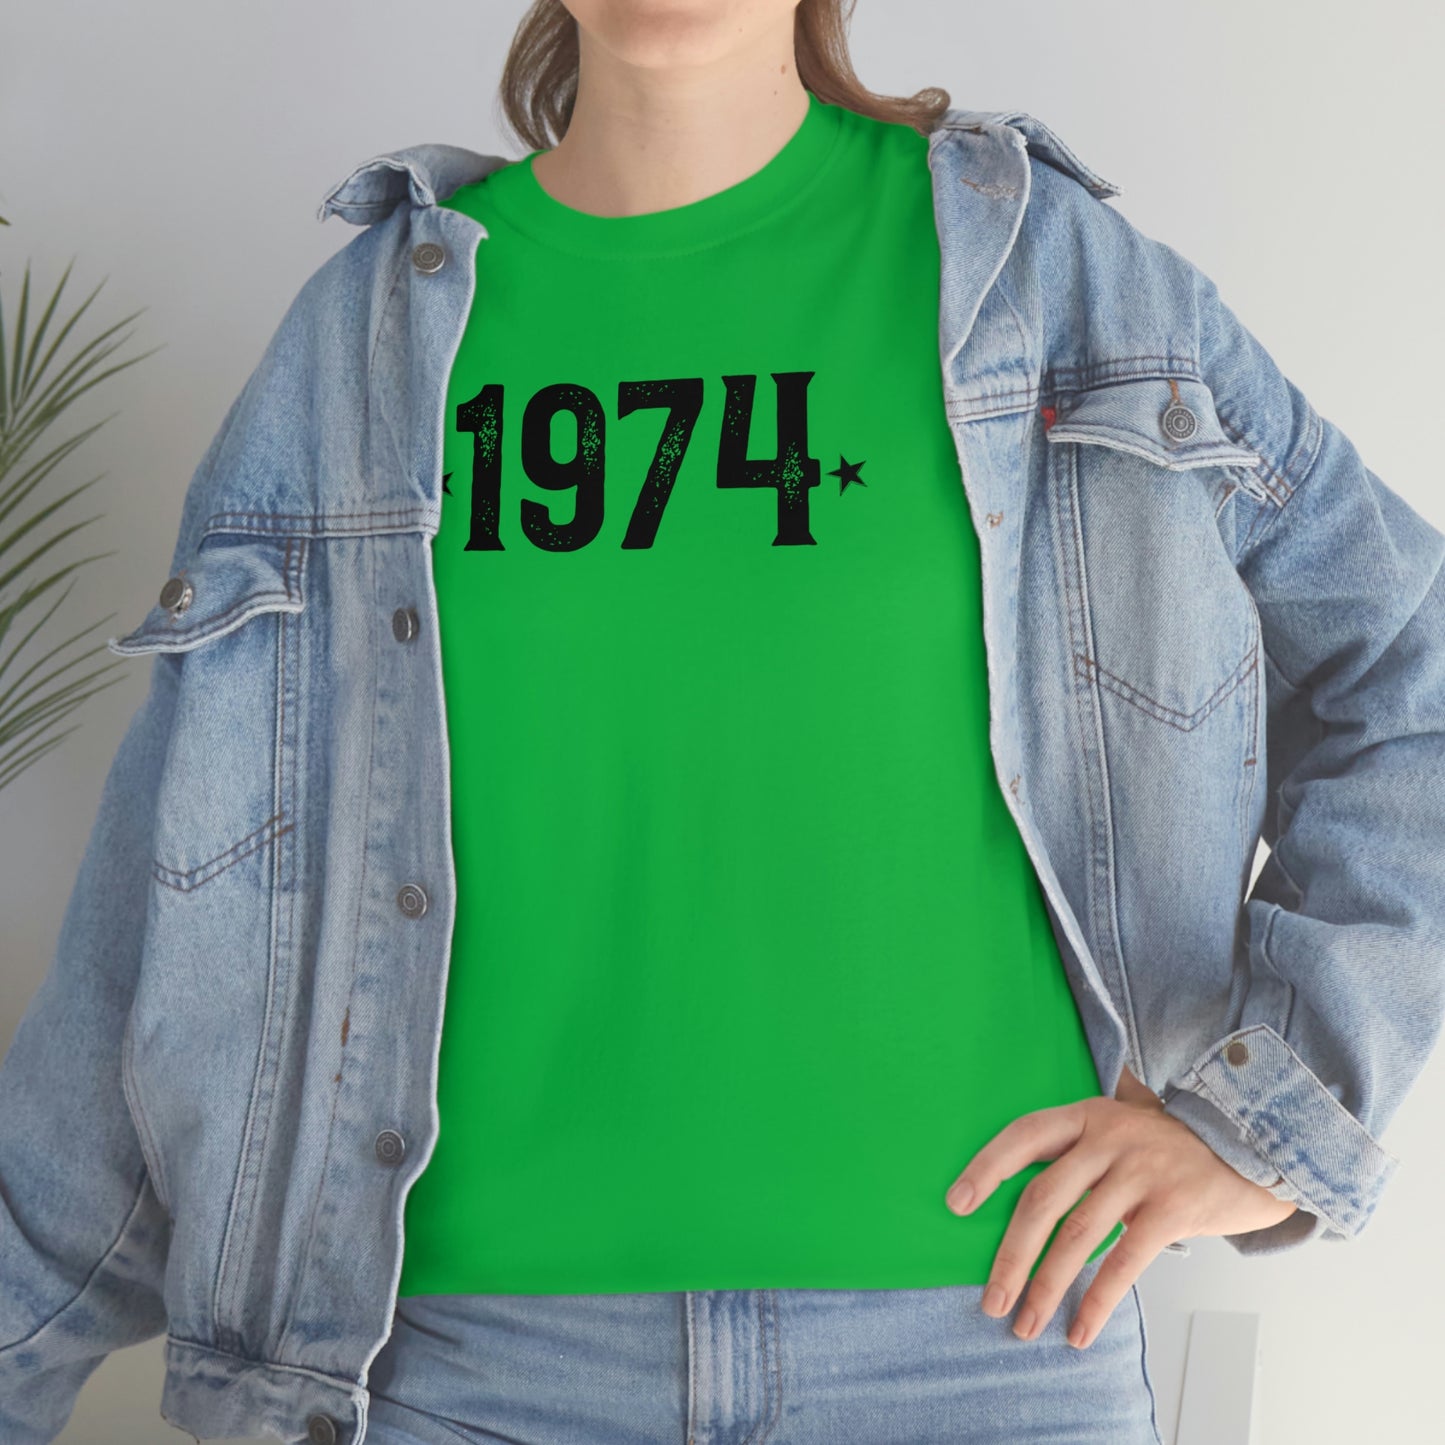 "1974 Birthday Year" T-Shirt - Weave Got Gifts - Unique Gifts You Won’t Find Anywhere Else!